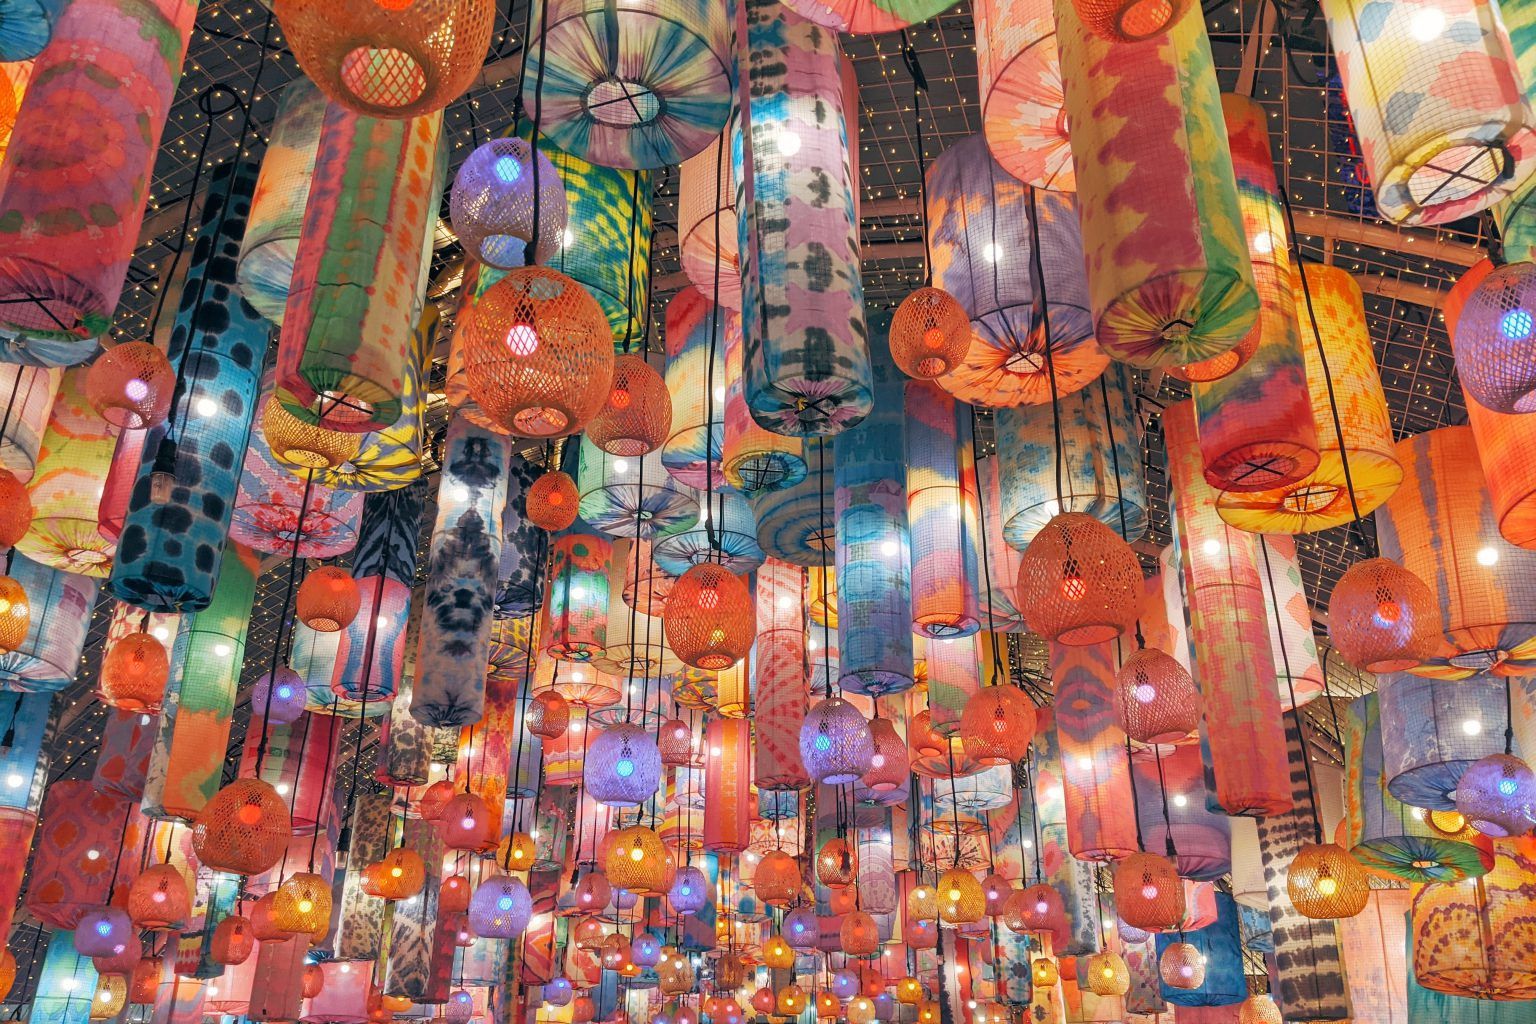 colorful paper lanterns collected in the ceiling